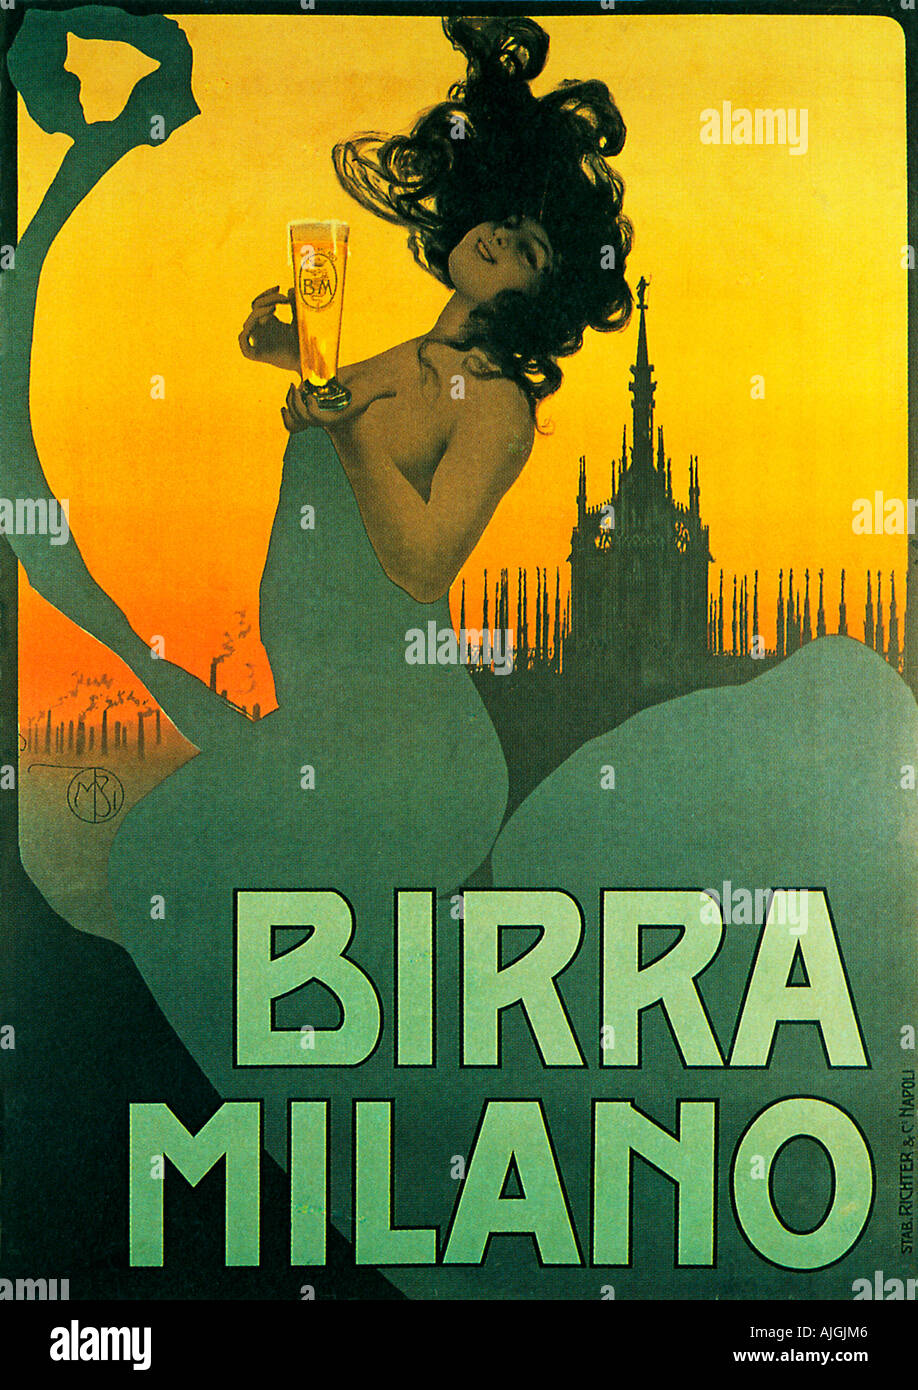 Birra Milano Art Nouveau Poster By Mario Borgoni With The Famous Milan Cathedral In The Background Stock Photo Alamy